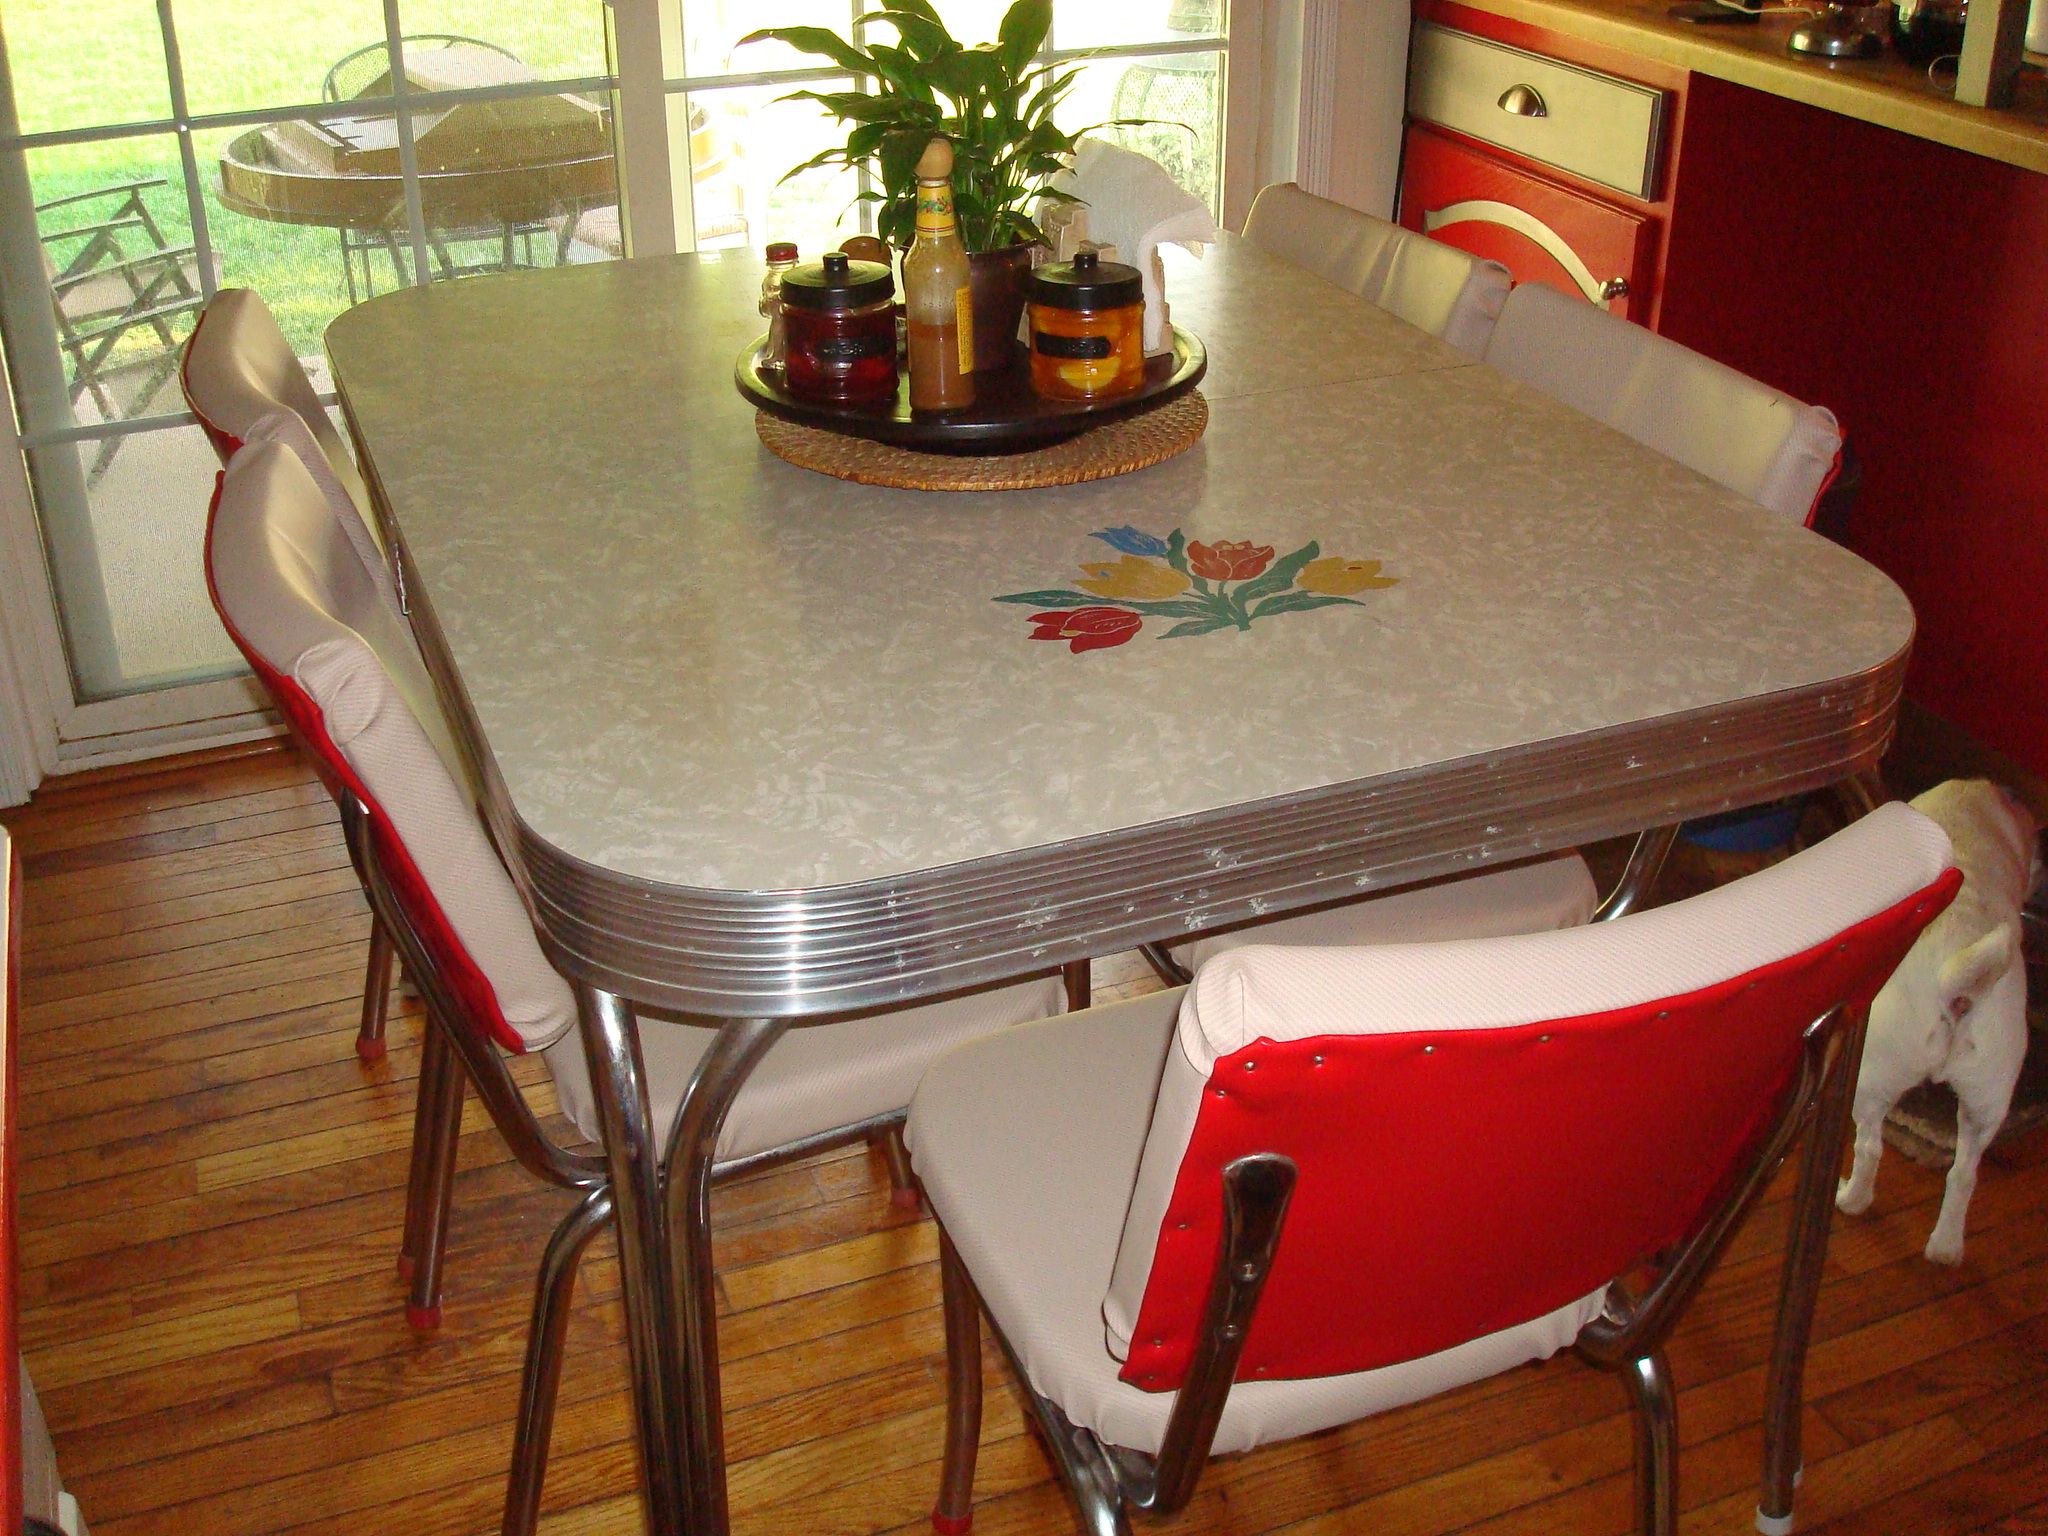 1950's kitchen table and chair for sale